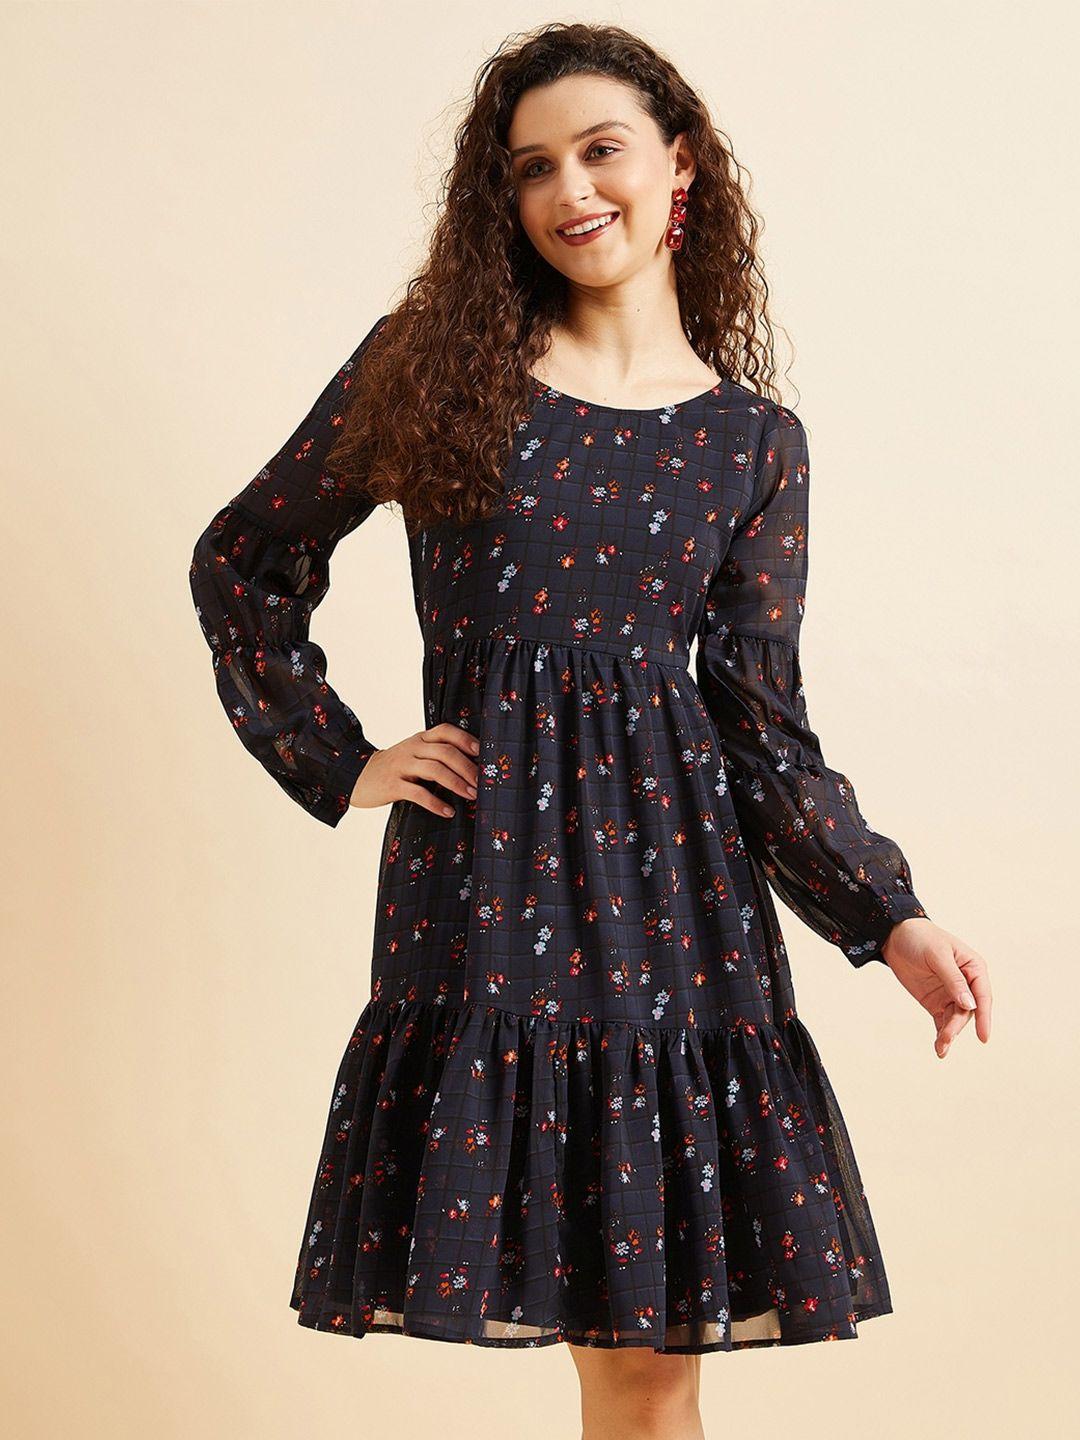 panit floral georgette fit and flare dress